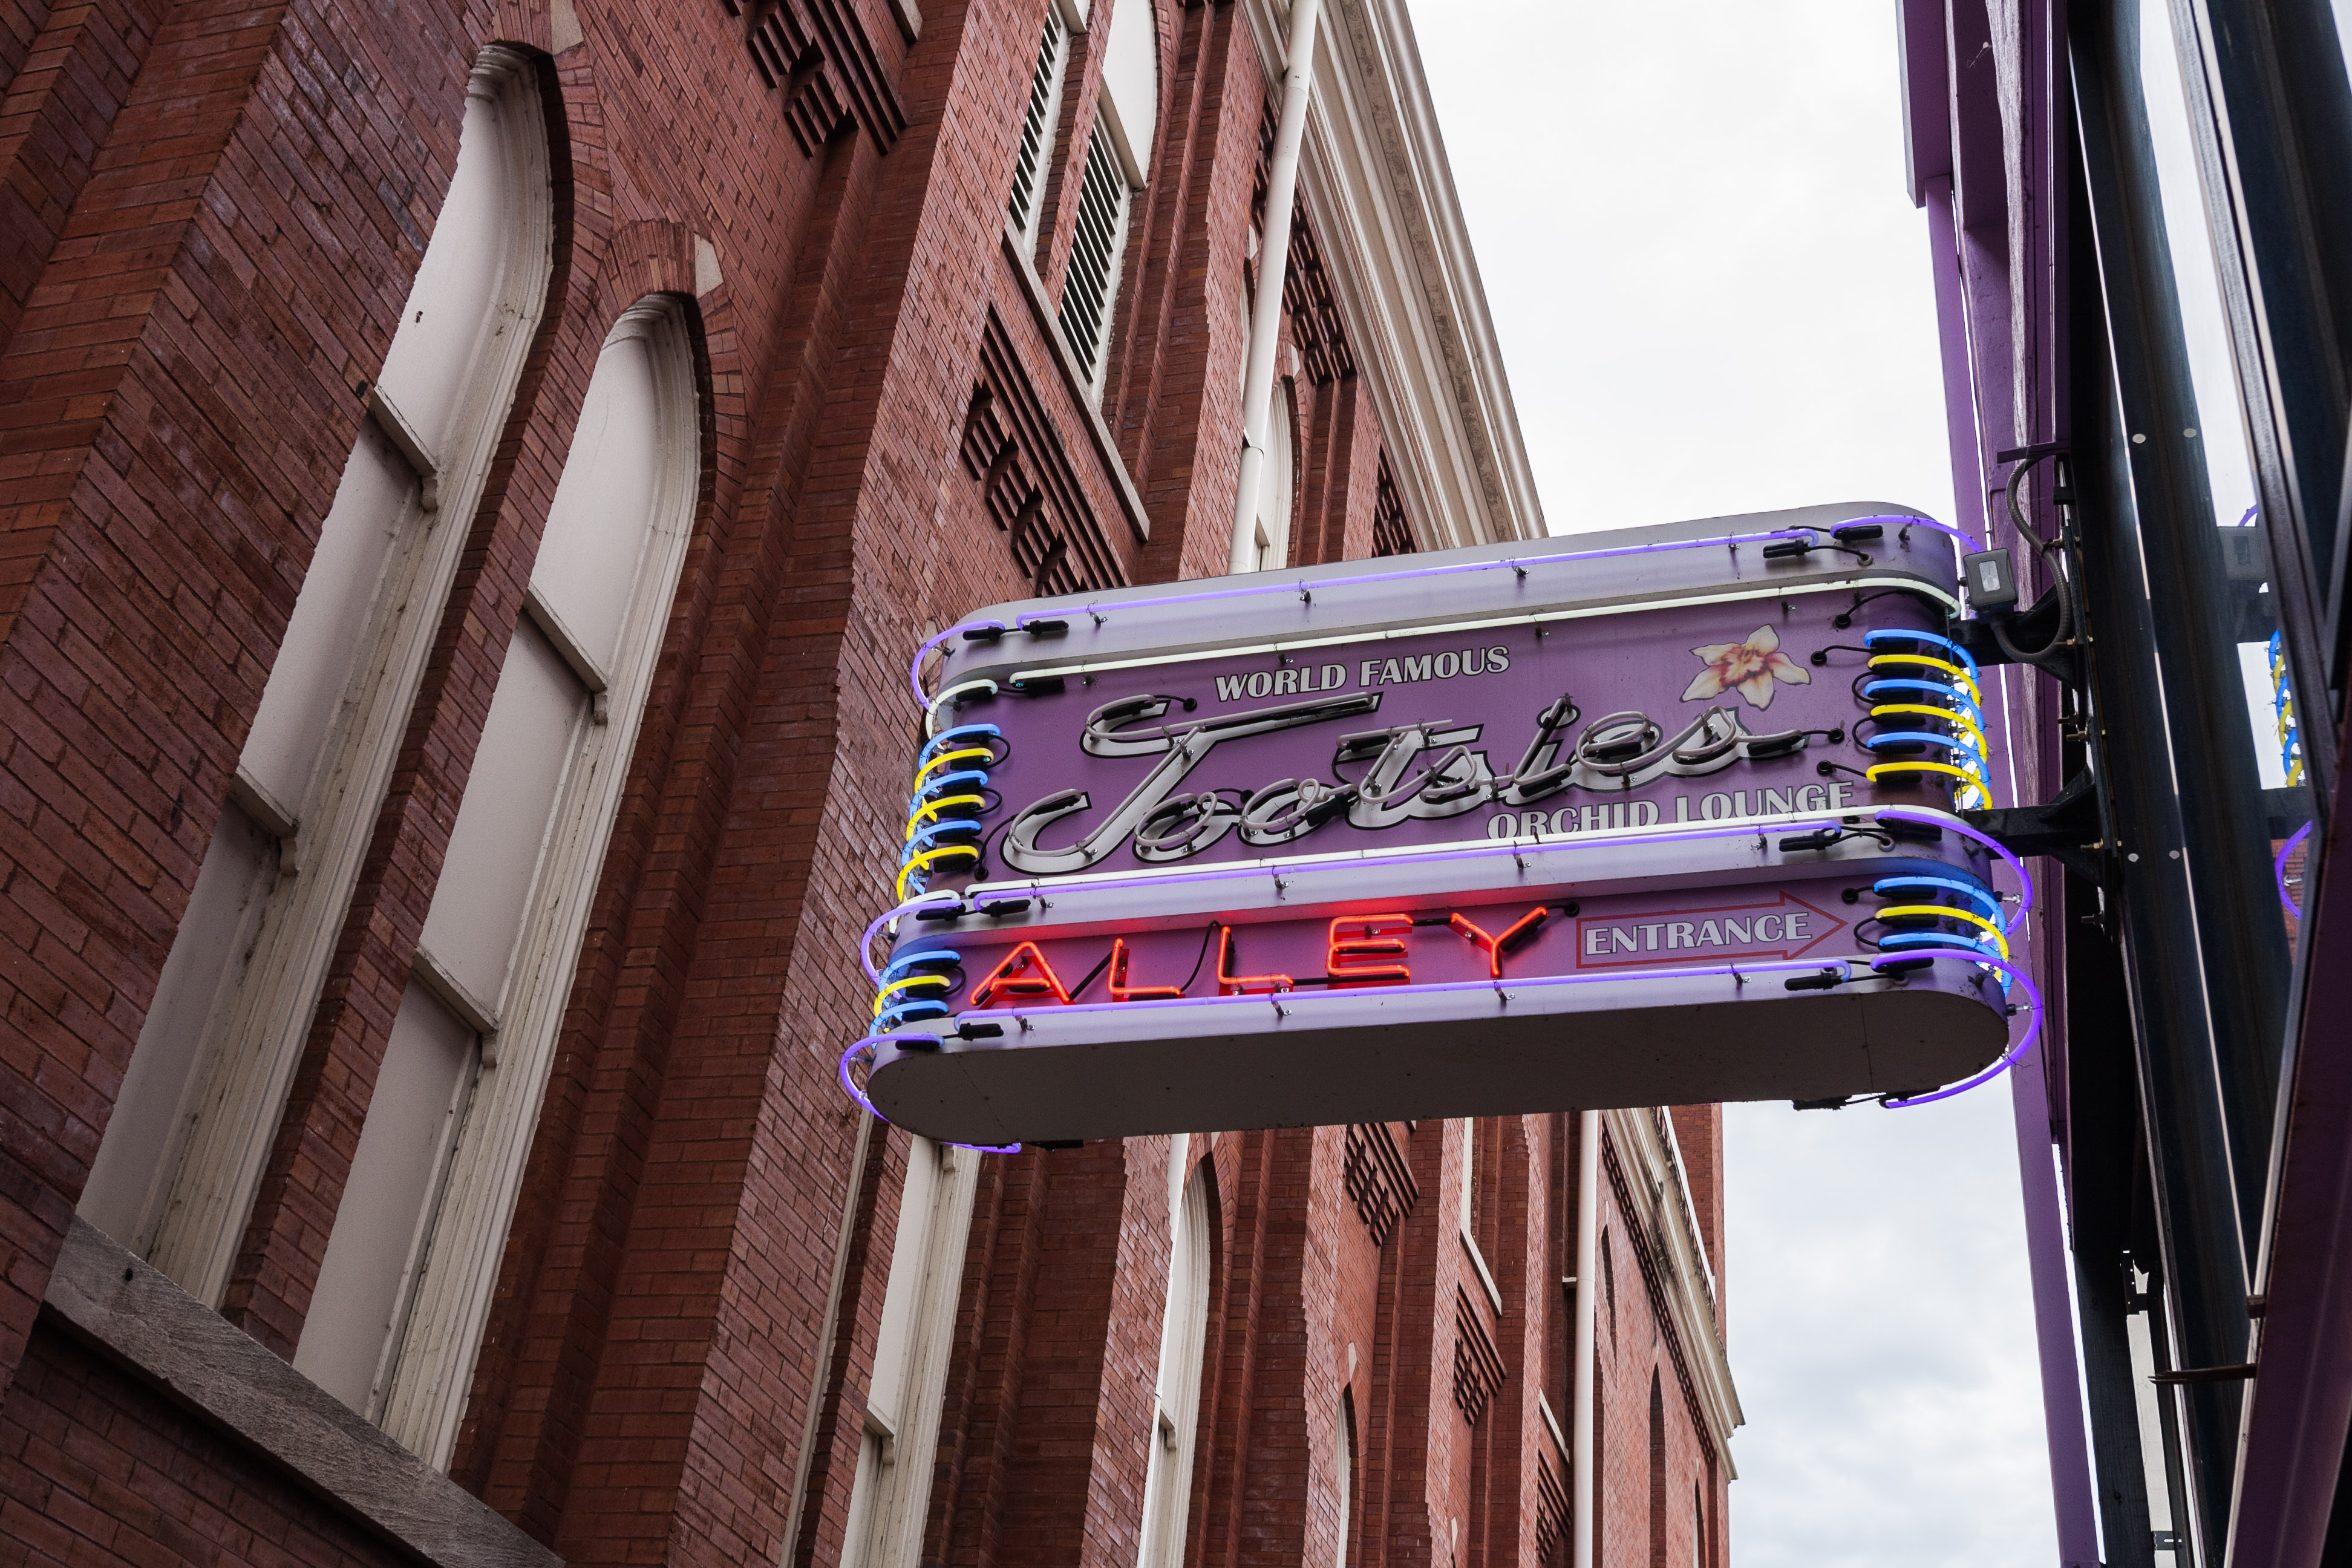 The alley entrance to Tootsie's Orchid Lounge. Image by Alexander Howard / Lonely Planet